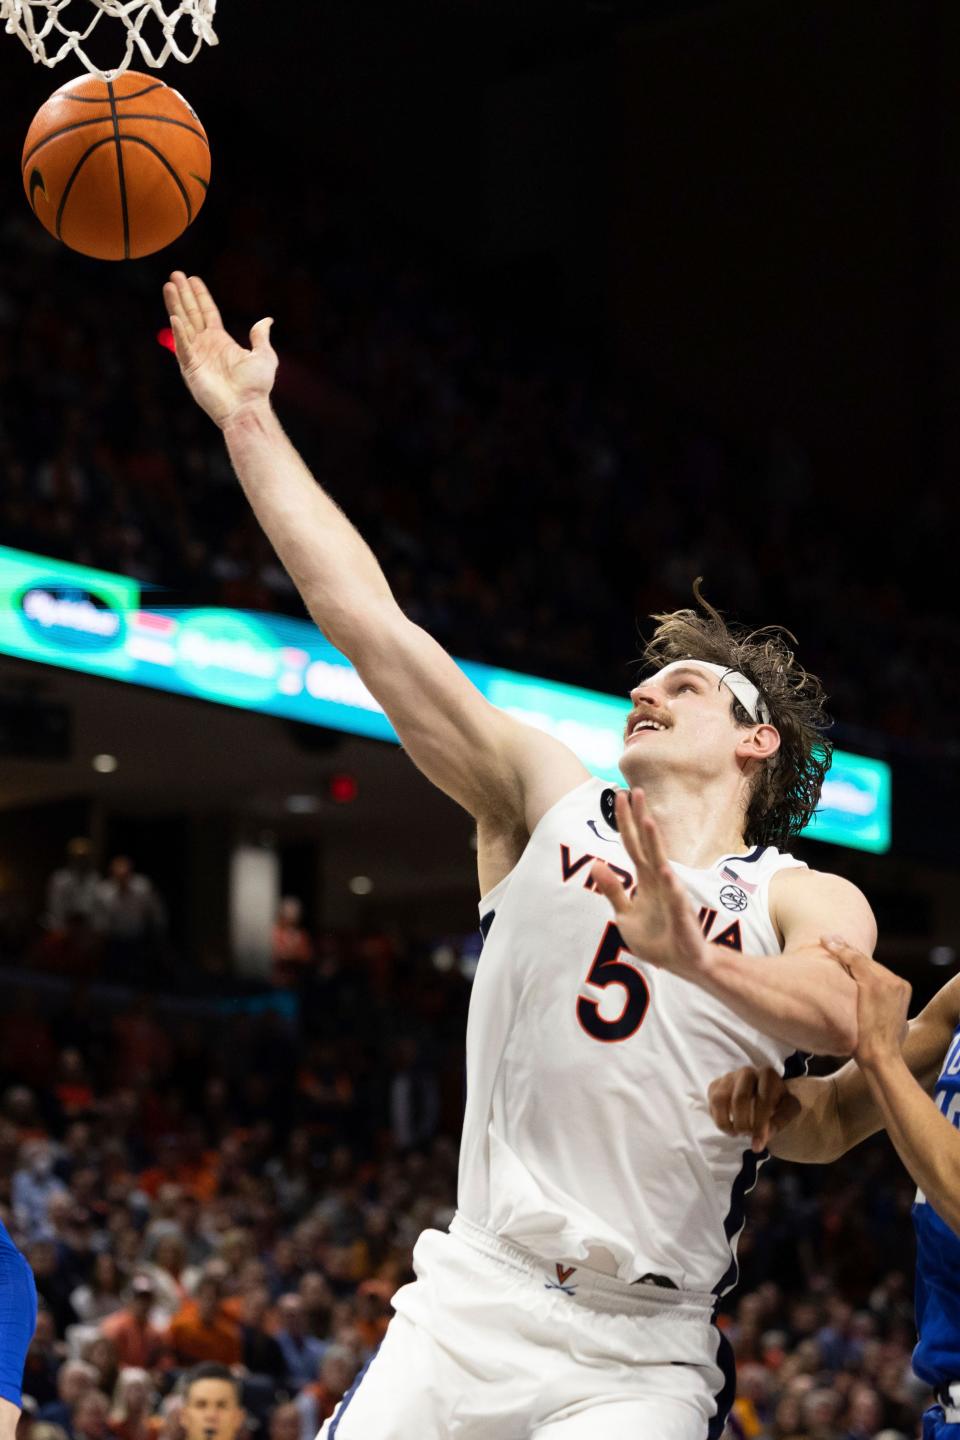 Virginia's Ben Vander Plas (5) fights for a basket against Duke during overtime of an NCAA college basketball game in Charlottesville, Va., Saturday, Feb. 11, 2023. (AP Photo/Mike Kropf)